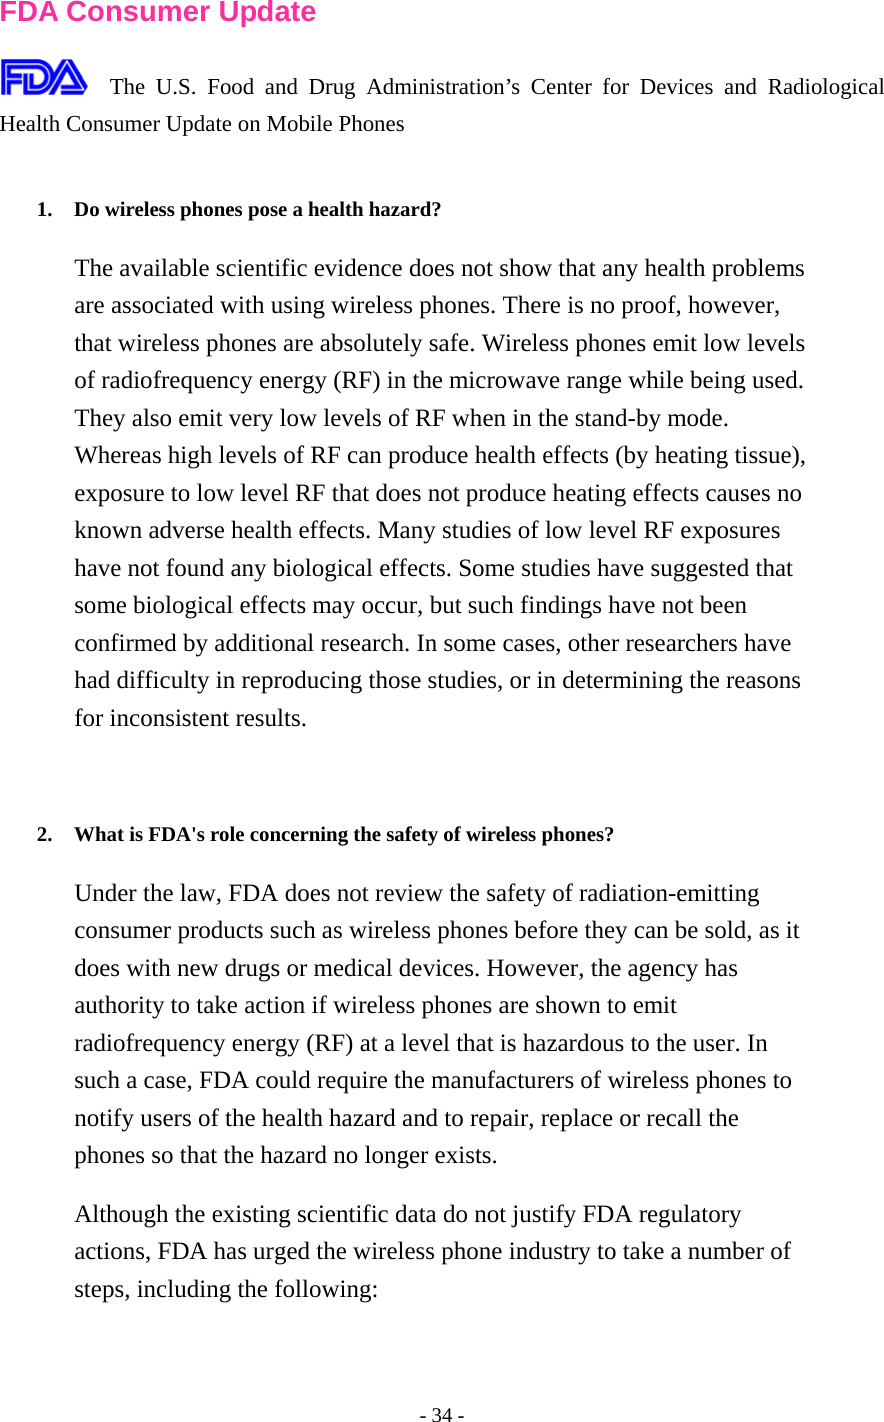 - 34 -  FDA Consumer Update  The U.S. Food and Drug Administration’s Center for Devices and Radiological Health Consumer Update on Mobile Phones  1. Do wireless phones pose a health hazard?   The available scientific evidence does not show that any health problems are associated with using wireless phones. There is no proof, however, that wireless phones are absolutely safe. Wireless phones emit low levels of radiofrequency energy (RF) in the microwave range while being used. They also emit very low levels of RF when in the stand-by mode. Whereas high levels of RF can produce health effects (by heating tissue), exposure to low level RF that does not produce heating effects causes no known adverse health effects. Many studies of low level RF exposures have not found any biological effects. Some studies have suggested that some biological effects may occur, but such findings have not been confirmed by additional research. In some cases, other researchers have had difficulty in reproducing those studies, or in determining the reasons for inconsistent results.   2. What is FDA&apos;s role concerning the safety of wireless phones?   Under the law, FDA does not review the safety of radiation-emitting consumer products such as wireless phones before they can be sold, as it does with new drugs or medical devices. However, the agency has authority to take action if wireless phones are shown to emit radiofrequency energy (RF) at a level that is hazardous to the user. In such a case, FDA could require the manufacturers of wireless phones to notify users of the health hazard and to repair, replace or recall the phones so that the hazard no longer exists. Although the existing scientific data do not justify FDA regulatory actions, FDA has urged the wireless phone industry to take a number of steps, including the following: 